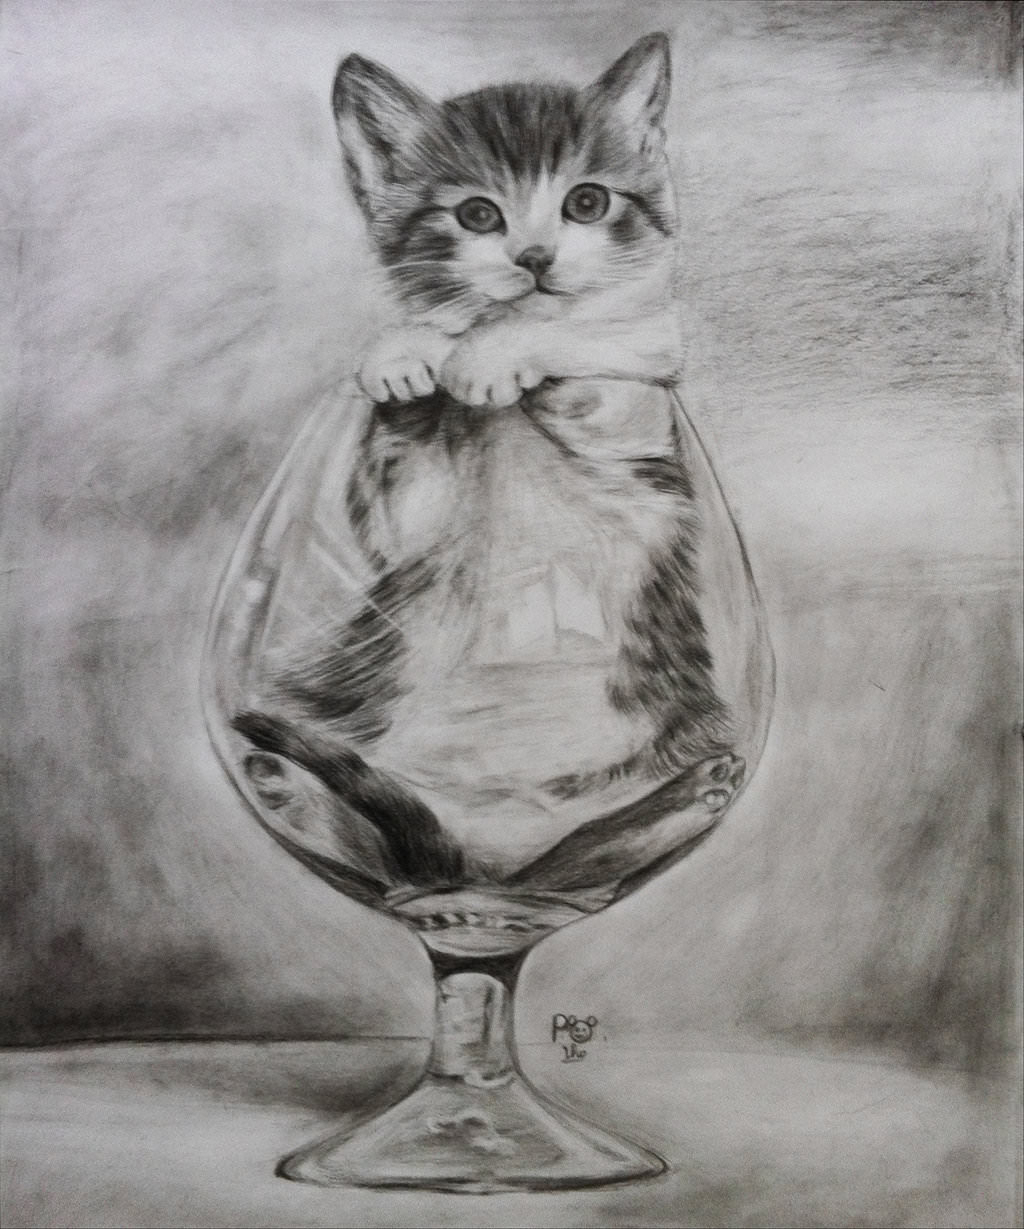 Cat Drawings In Pencil Pencil Sketches Of Cats 19+ Cat Drawings, Art Ideas, Sketches  - DRAWING AND PAINTING